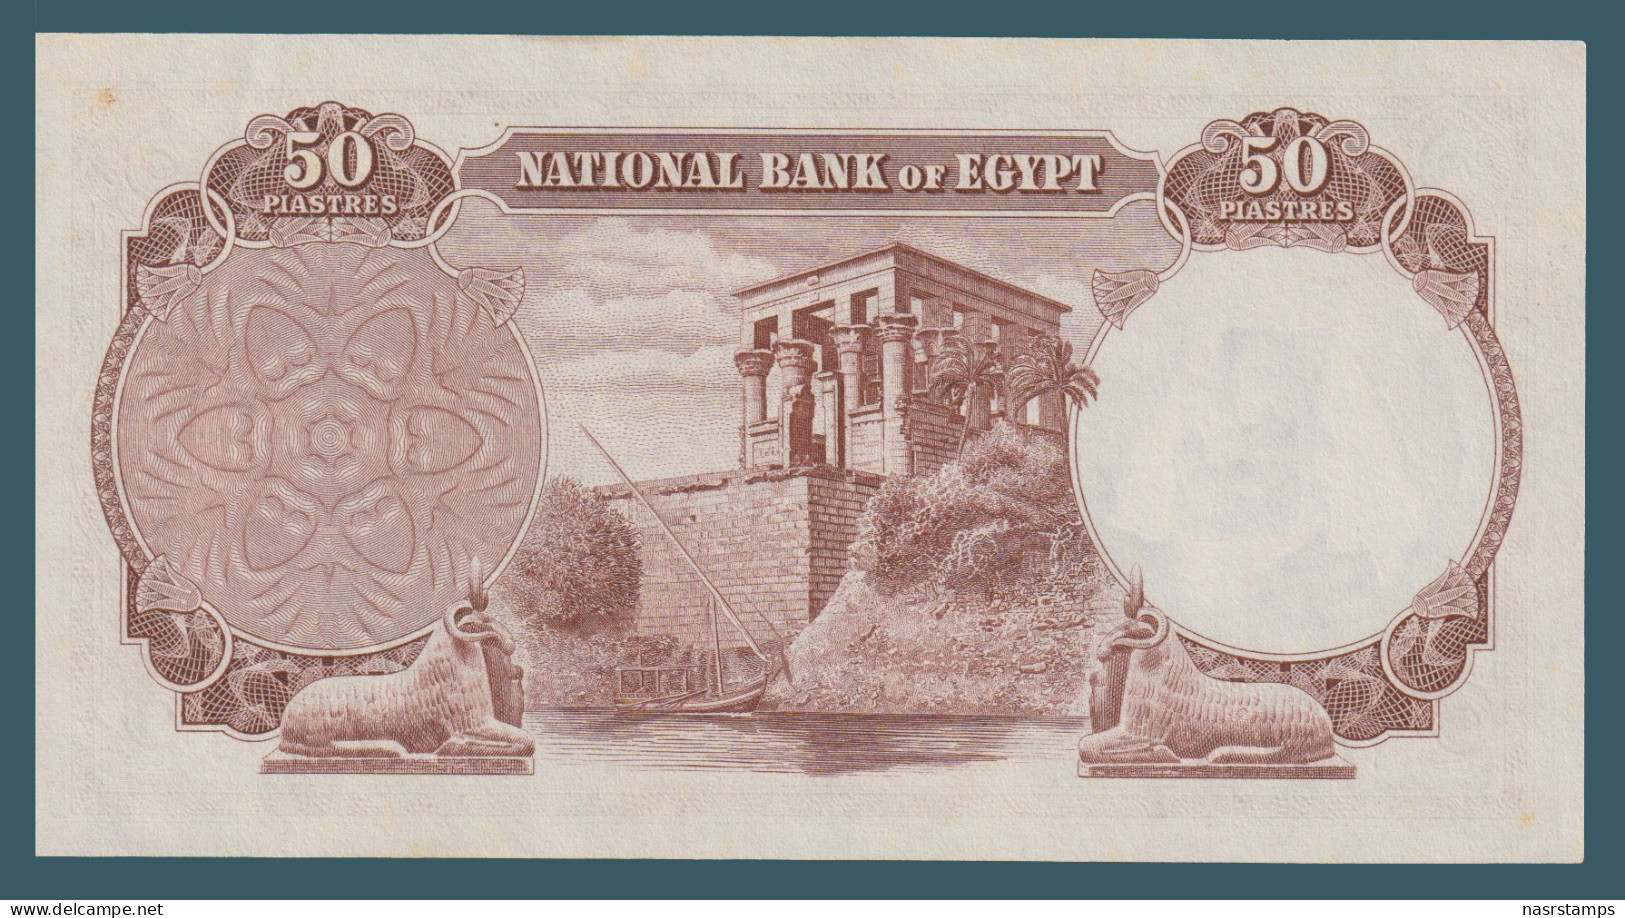 Egypt - 1954 - Rare - Last Prefix "10" - 50 Piasters - Pick-29 - Sign #8 - Fekry - XF - As Scan - Aegypten